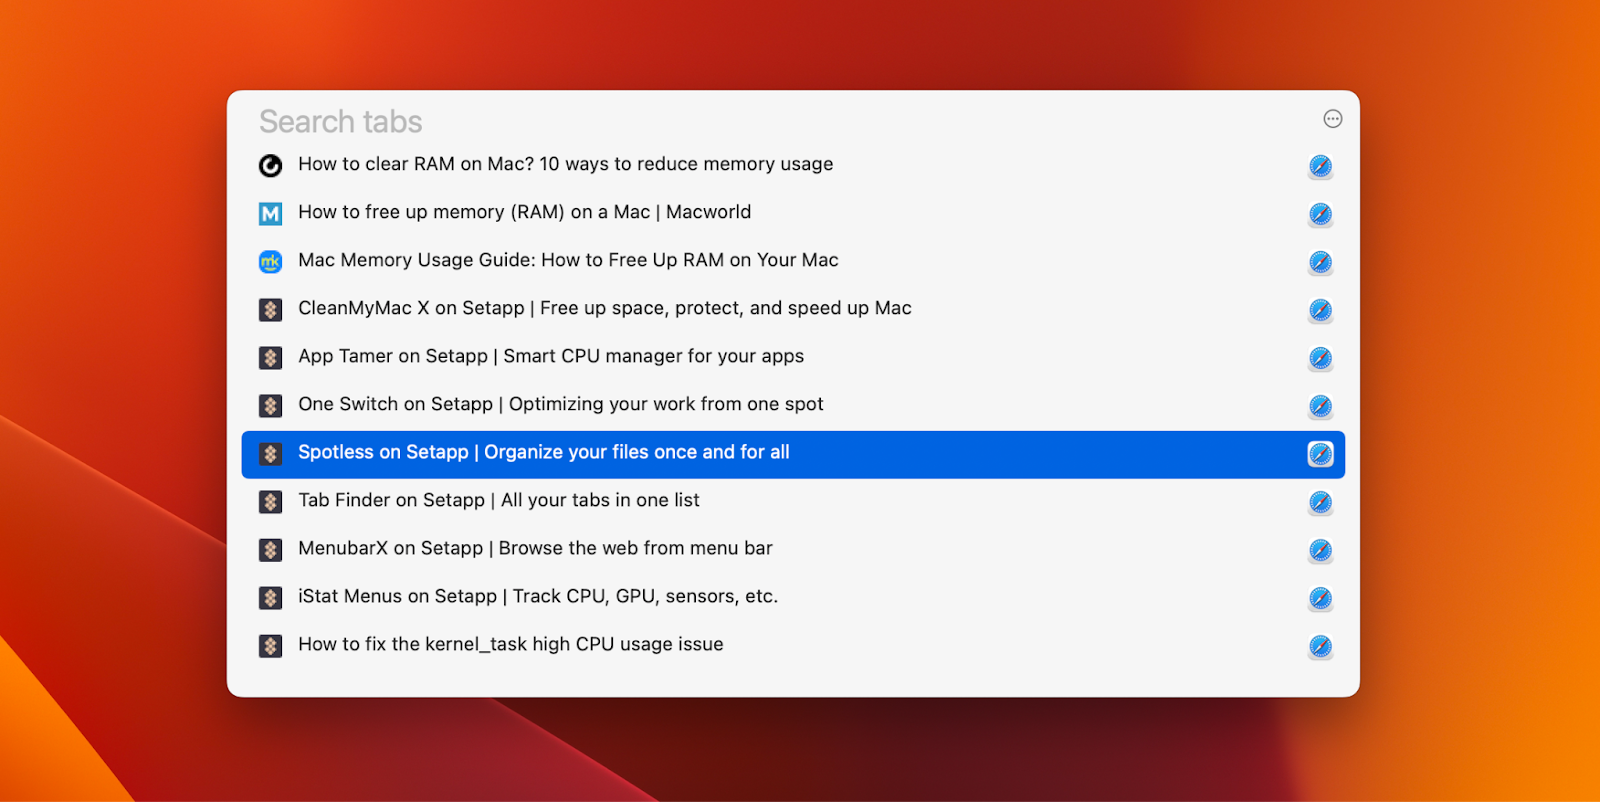 type vil beslutte nogle få How to clear RAM on Mac and reduce memory usage